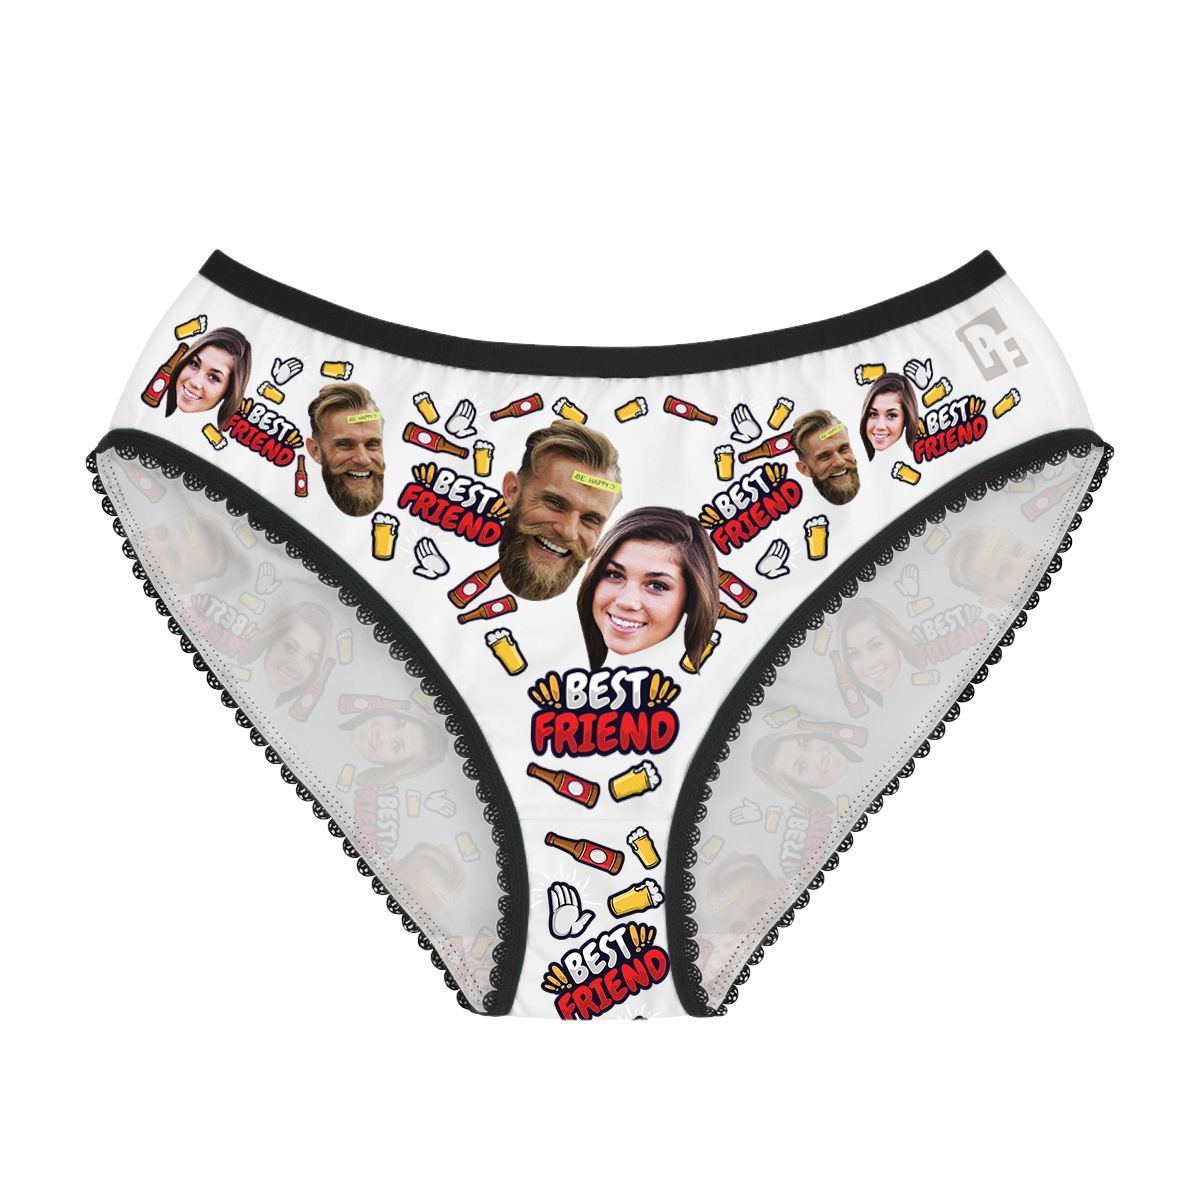 White BFF for him women's underwear briefs personalized with photo printed on them